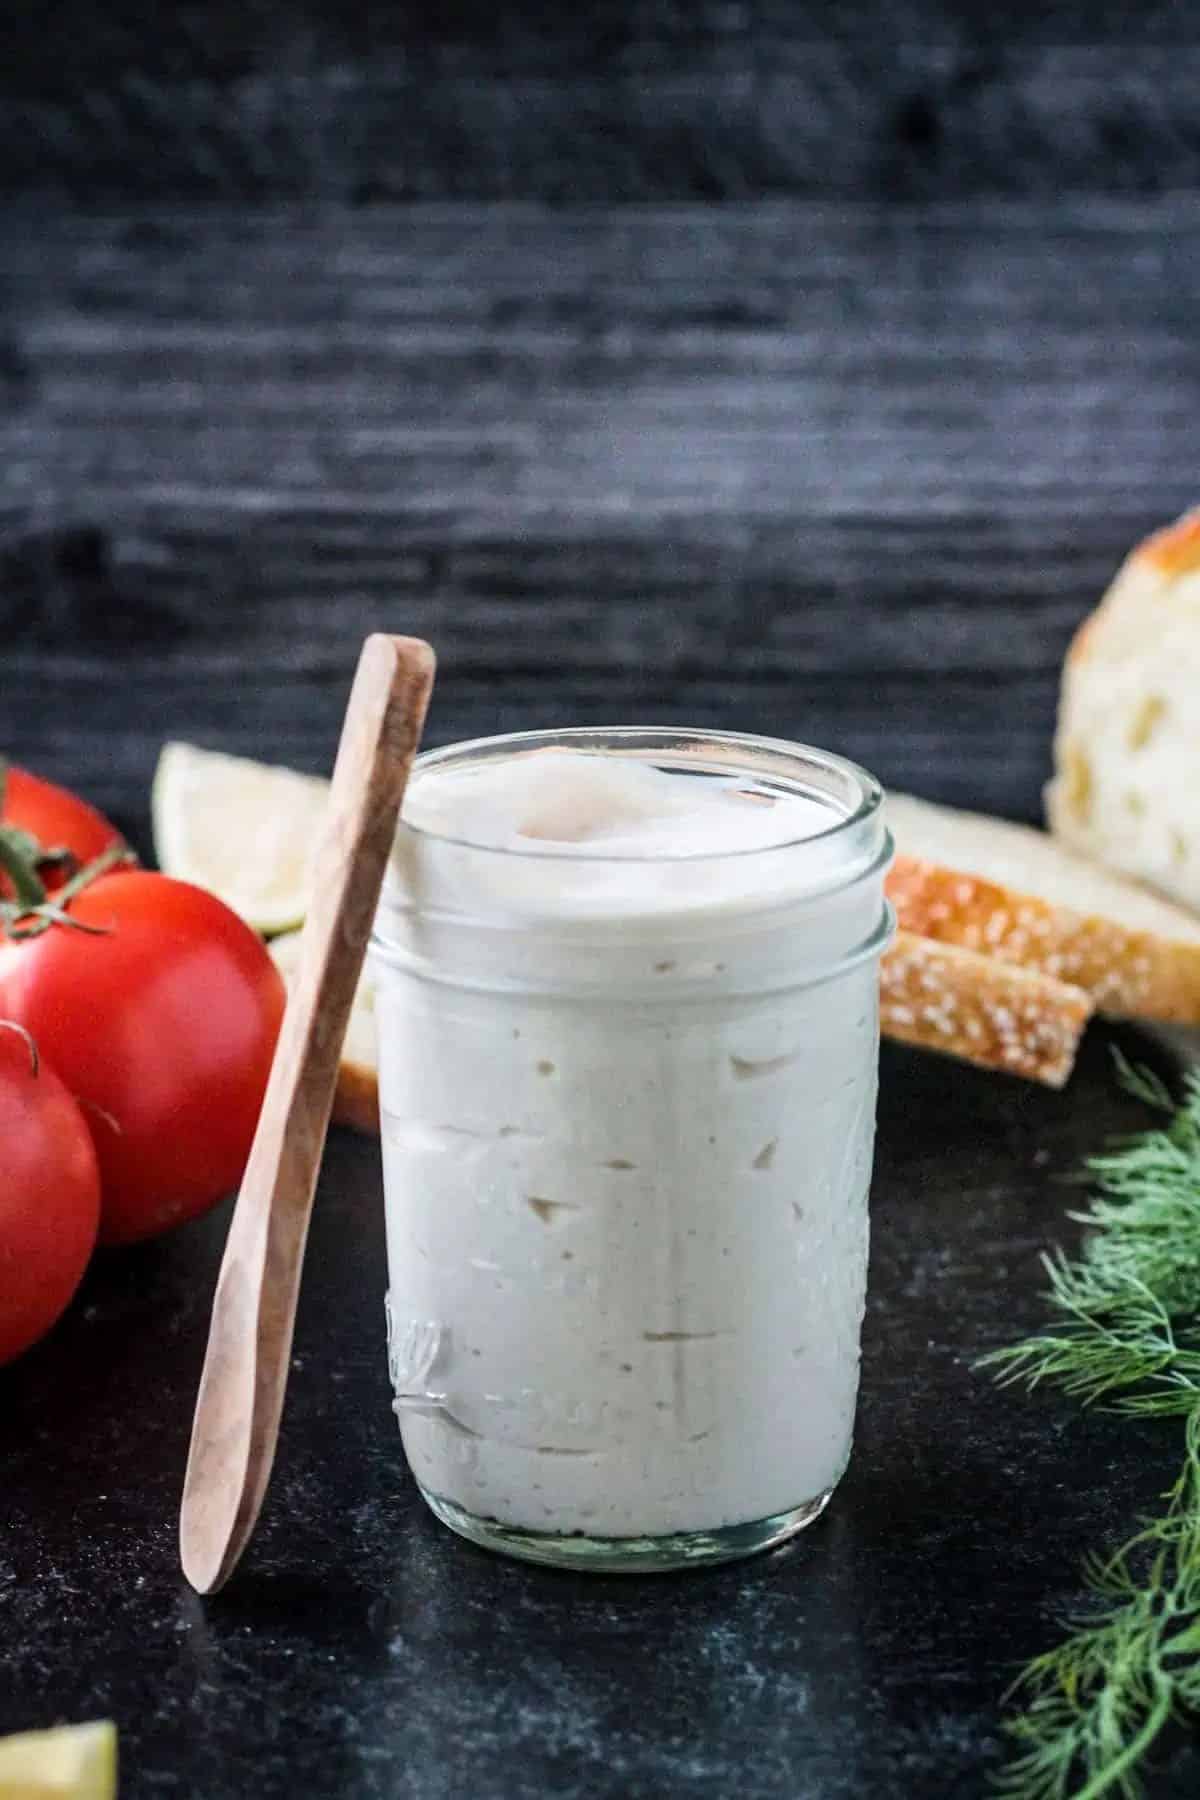 vegan mayo in a mason jar with a wooden spoon next to it.